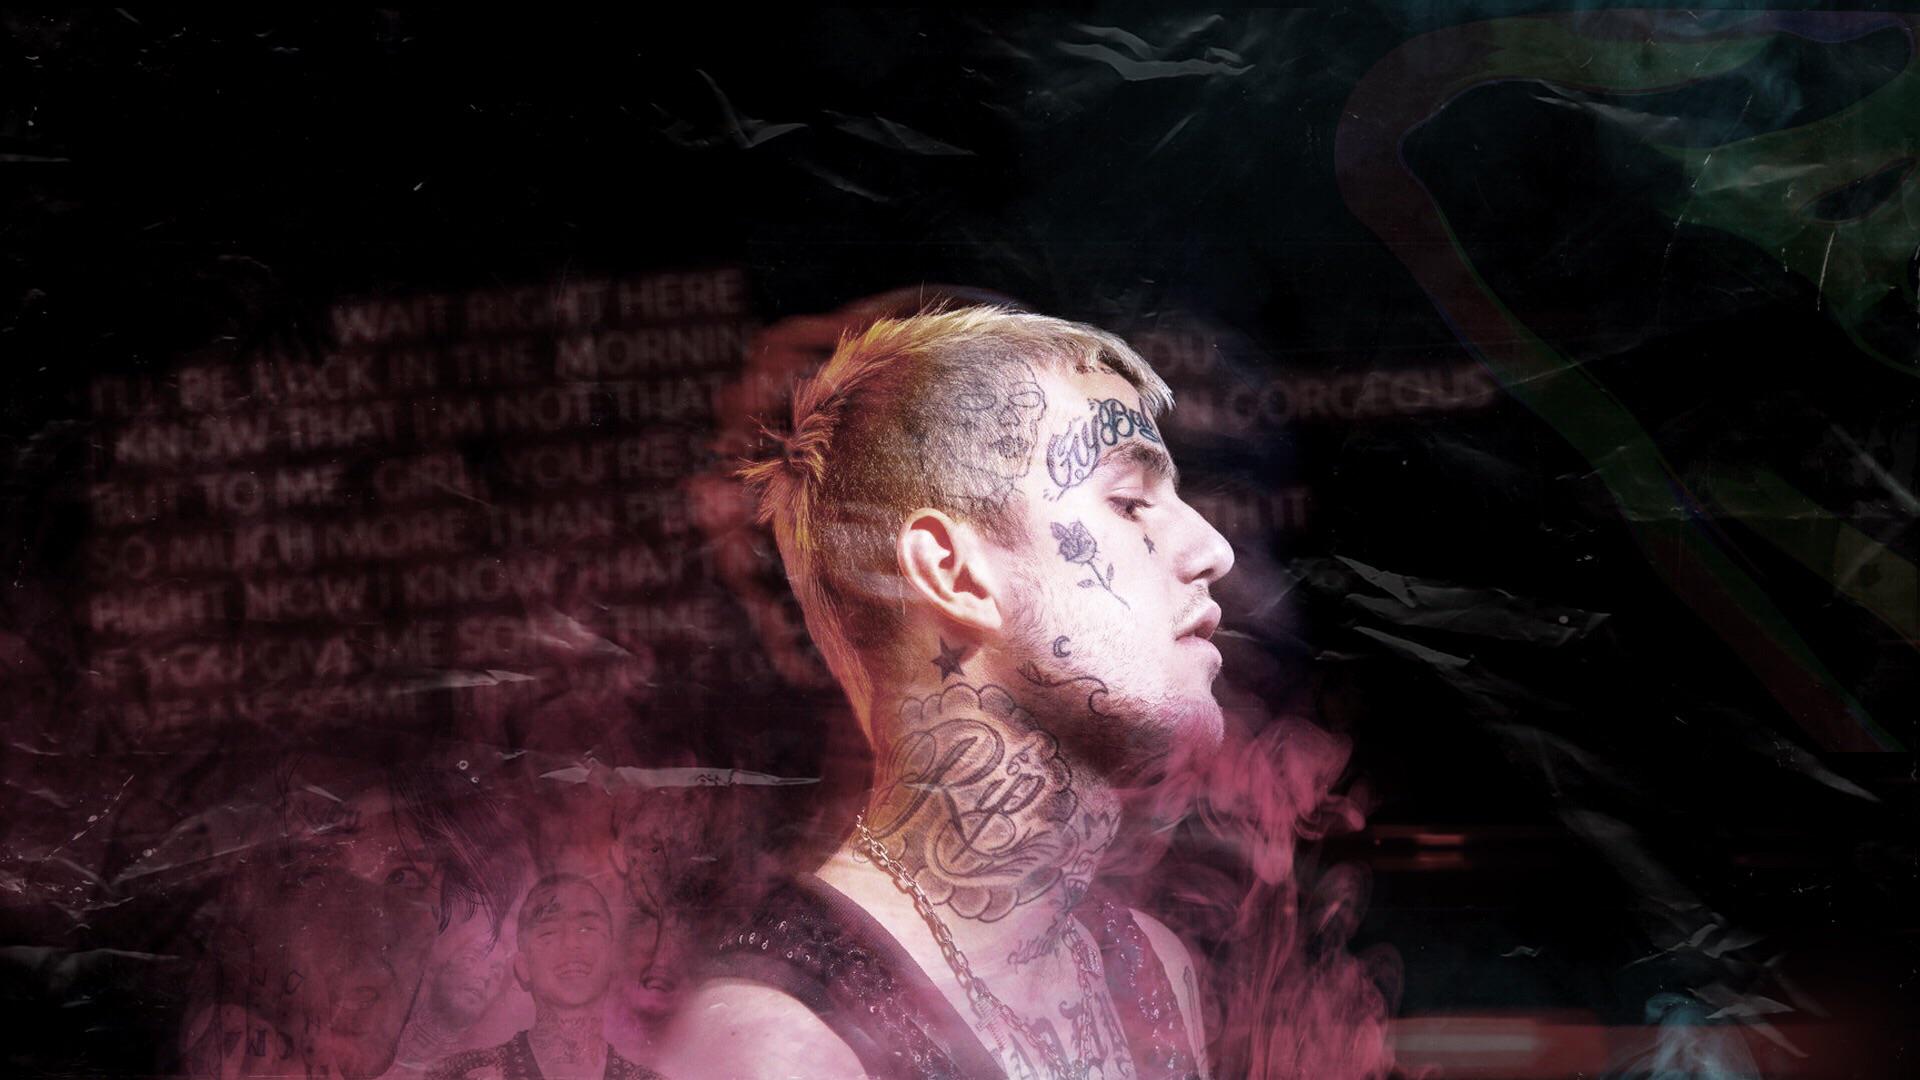 Lil Peep Wallpaper with high-resolution 1920x1080 pixel. You can use this wallpaper for your Windows and Mac OS computers as well as your Android and iPhone smartphones - Lil Peep